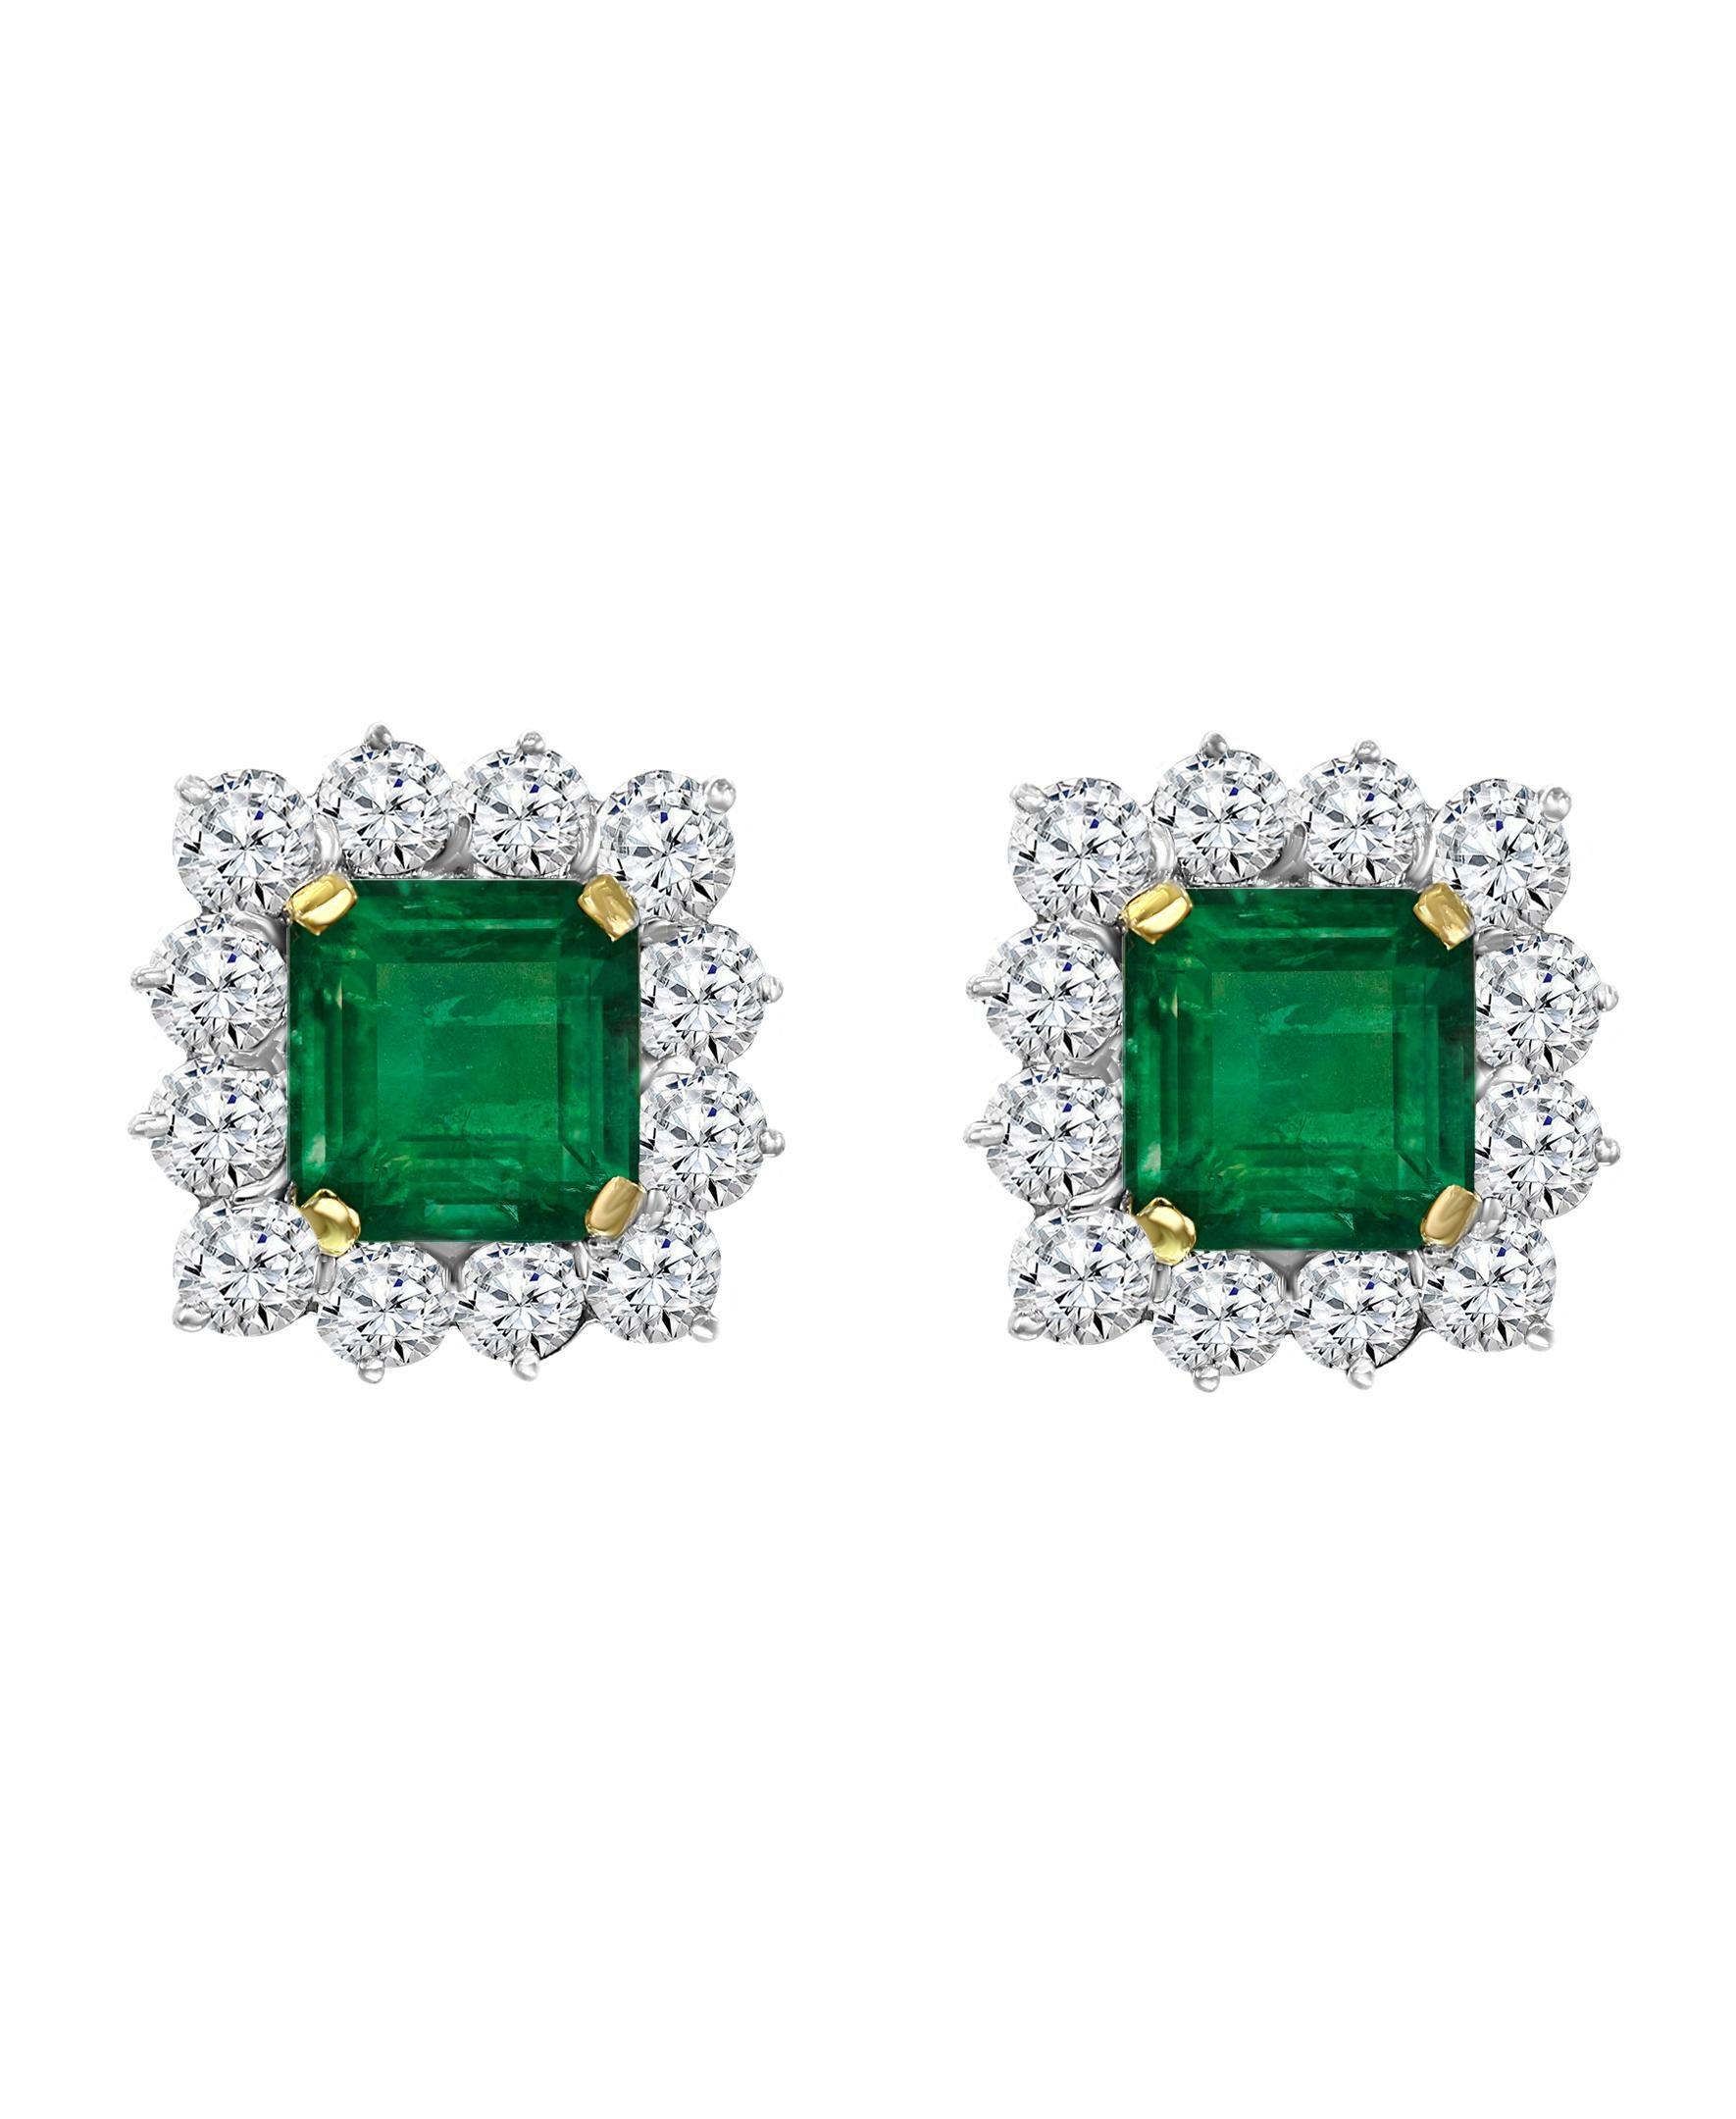 AGL Certified Insignificant Traditional 5 Ct Colombian Emerald Diamond Earrings 
5 Carat finest Colombian Emerald Cut Emerald  Diamond  Post  Earrings  18 Karat Gold 
This exquisite pair of earrings are beautifully crafted with 18 karat White gold